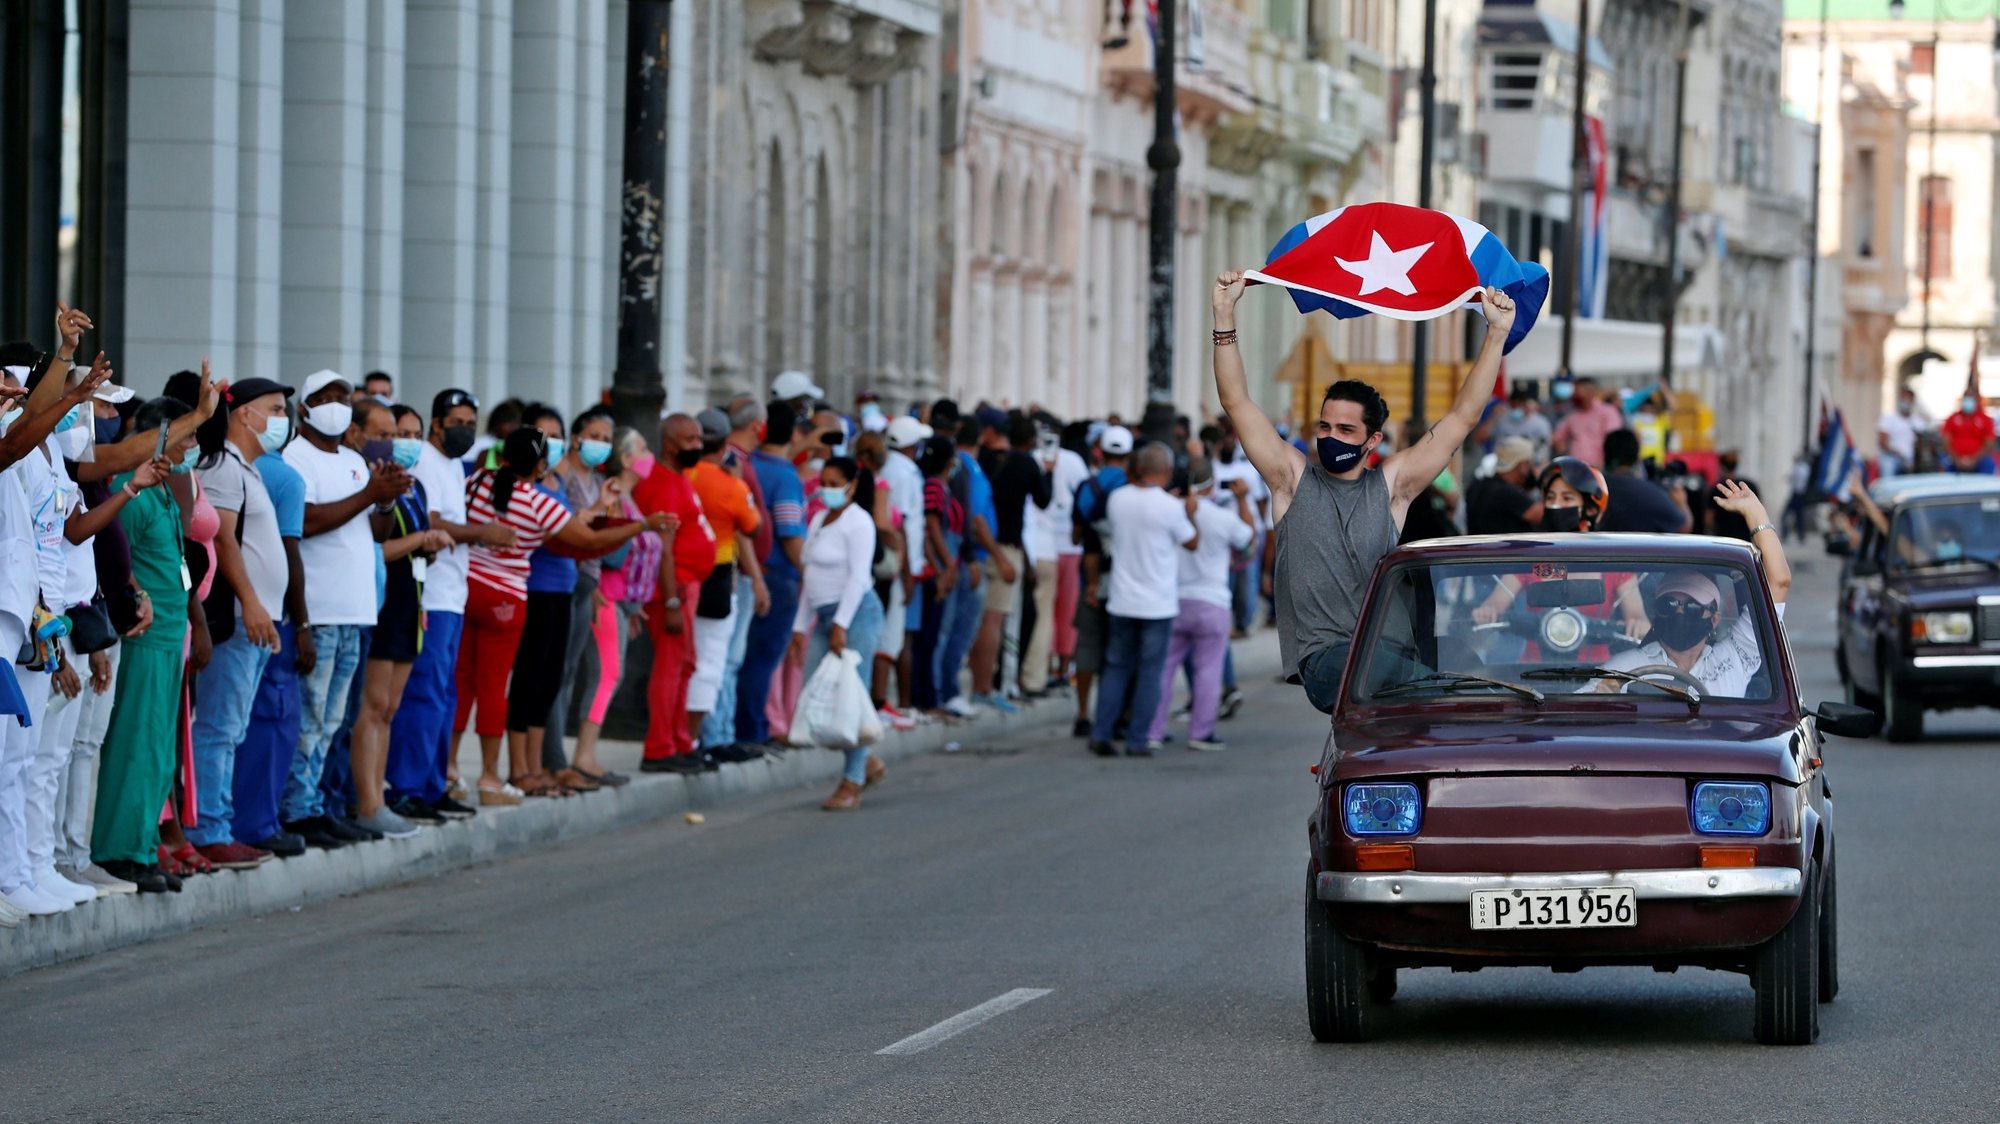 epa09398551 A person waves a Cuban flag during a march in support of the Cuban revolution through the Malecon area in Havana, Cuba, 05 August 2021. Cubans took to the streets in Cuba on 11 July to protest the government response to the COVID-19 pandemic, shortages of medicines and basic commodities, and decliing infrustructure on the island nation.  EPA/Ernesto Mastrascusa